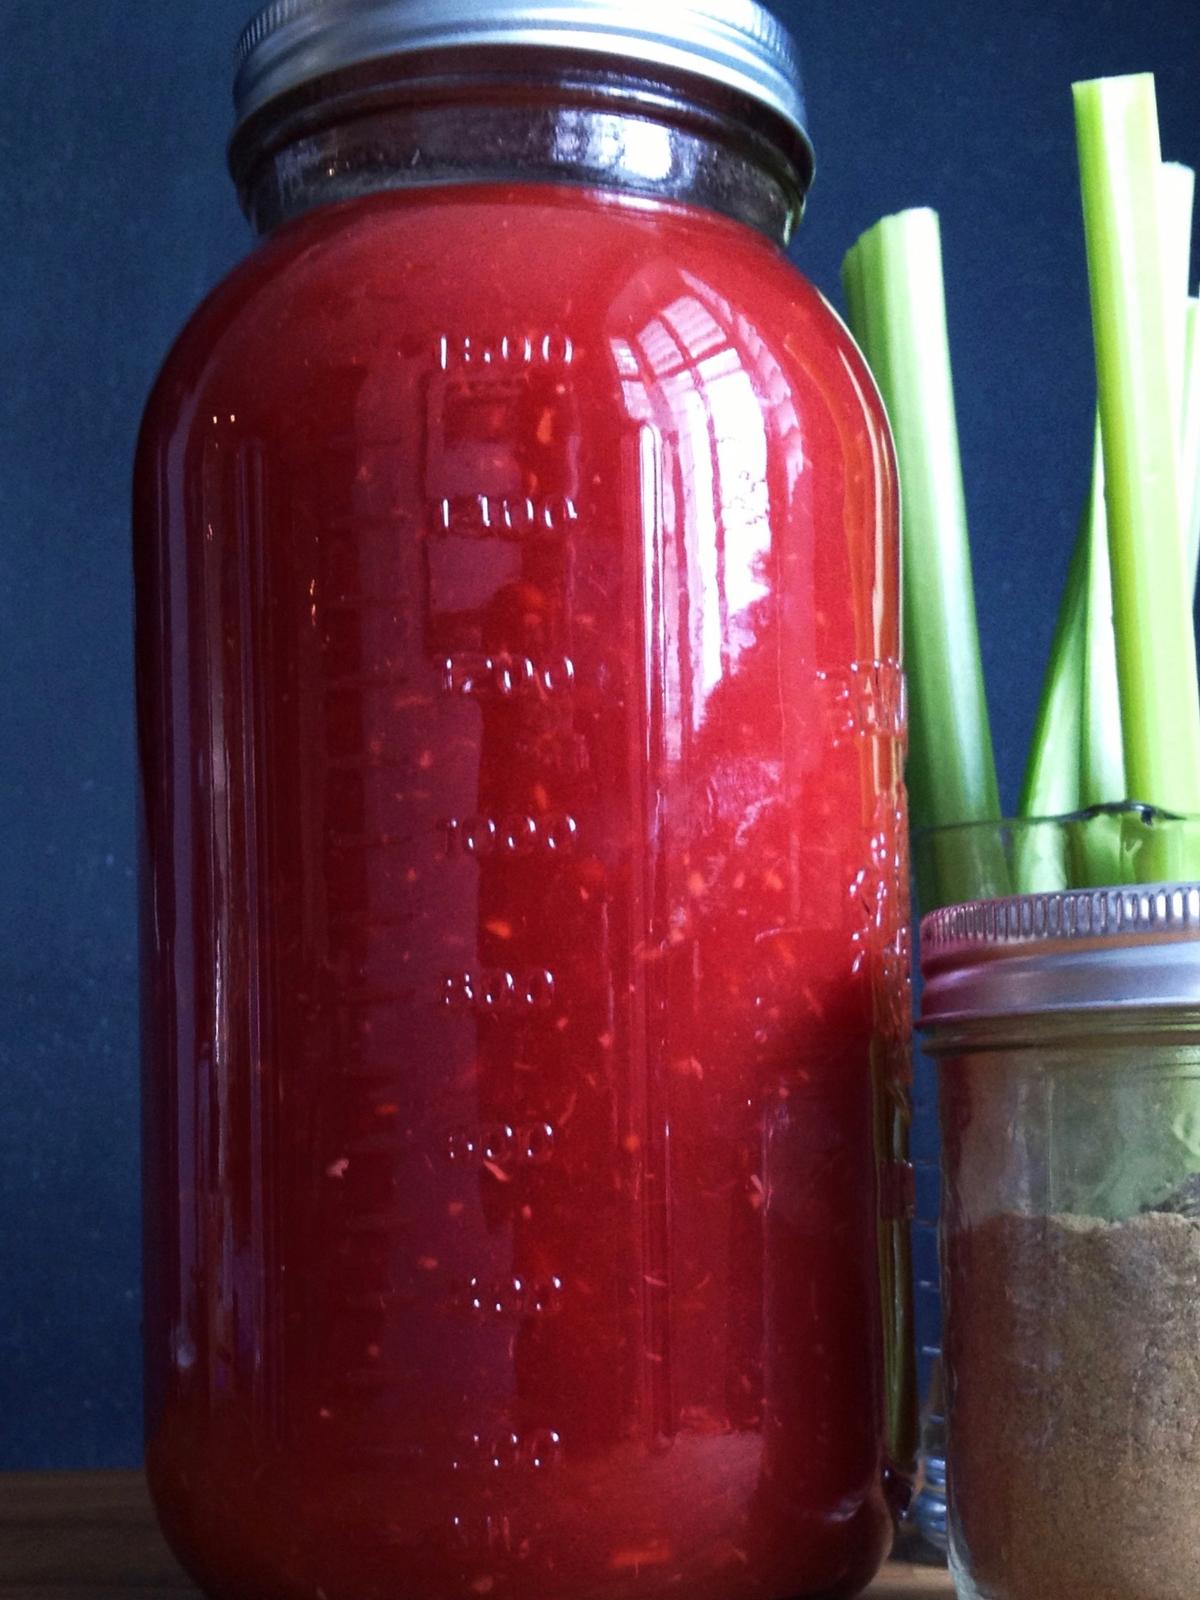 This savory bloody mary cocktail mix is perfect for breakfast or brunch. (Kary Osmond/TNS)